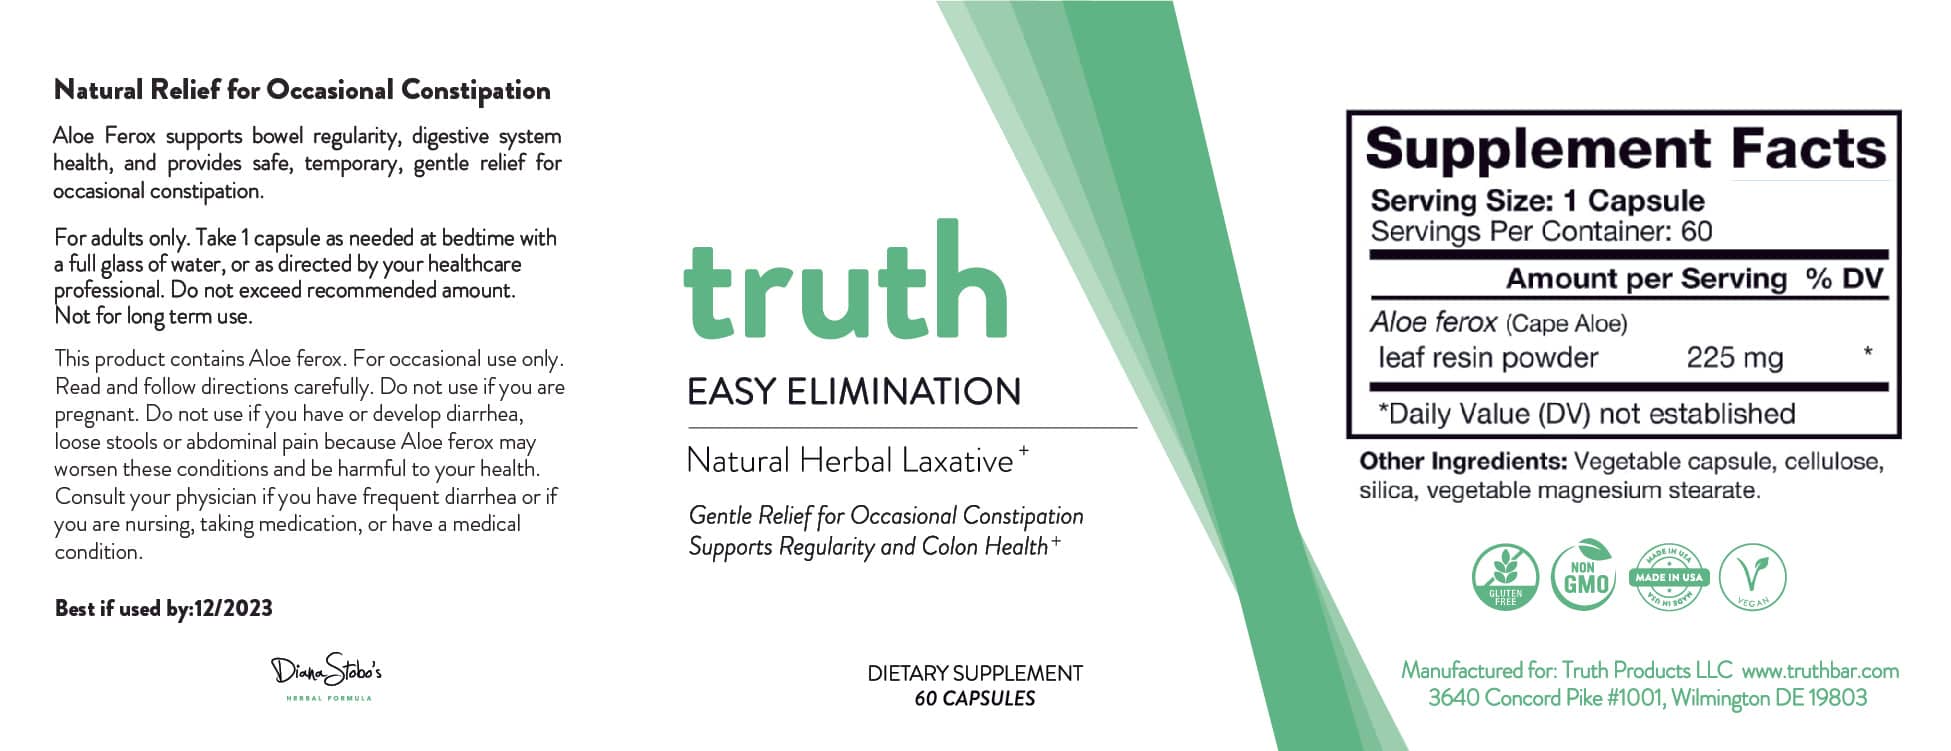 Easy Elimination - Truth Products LLC